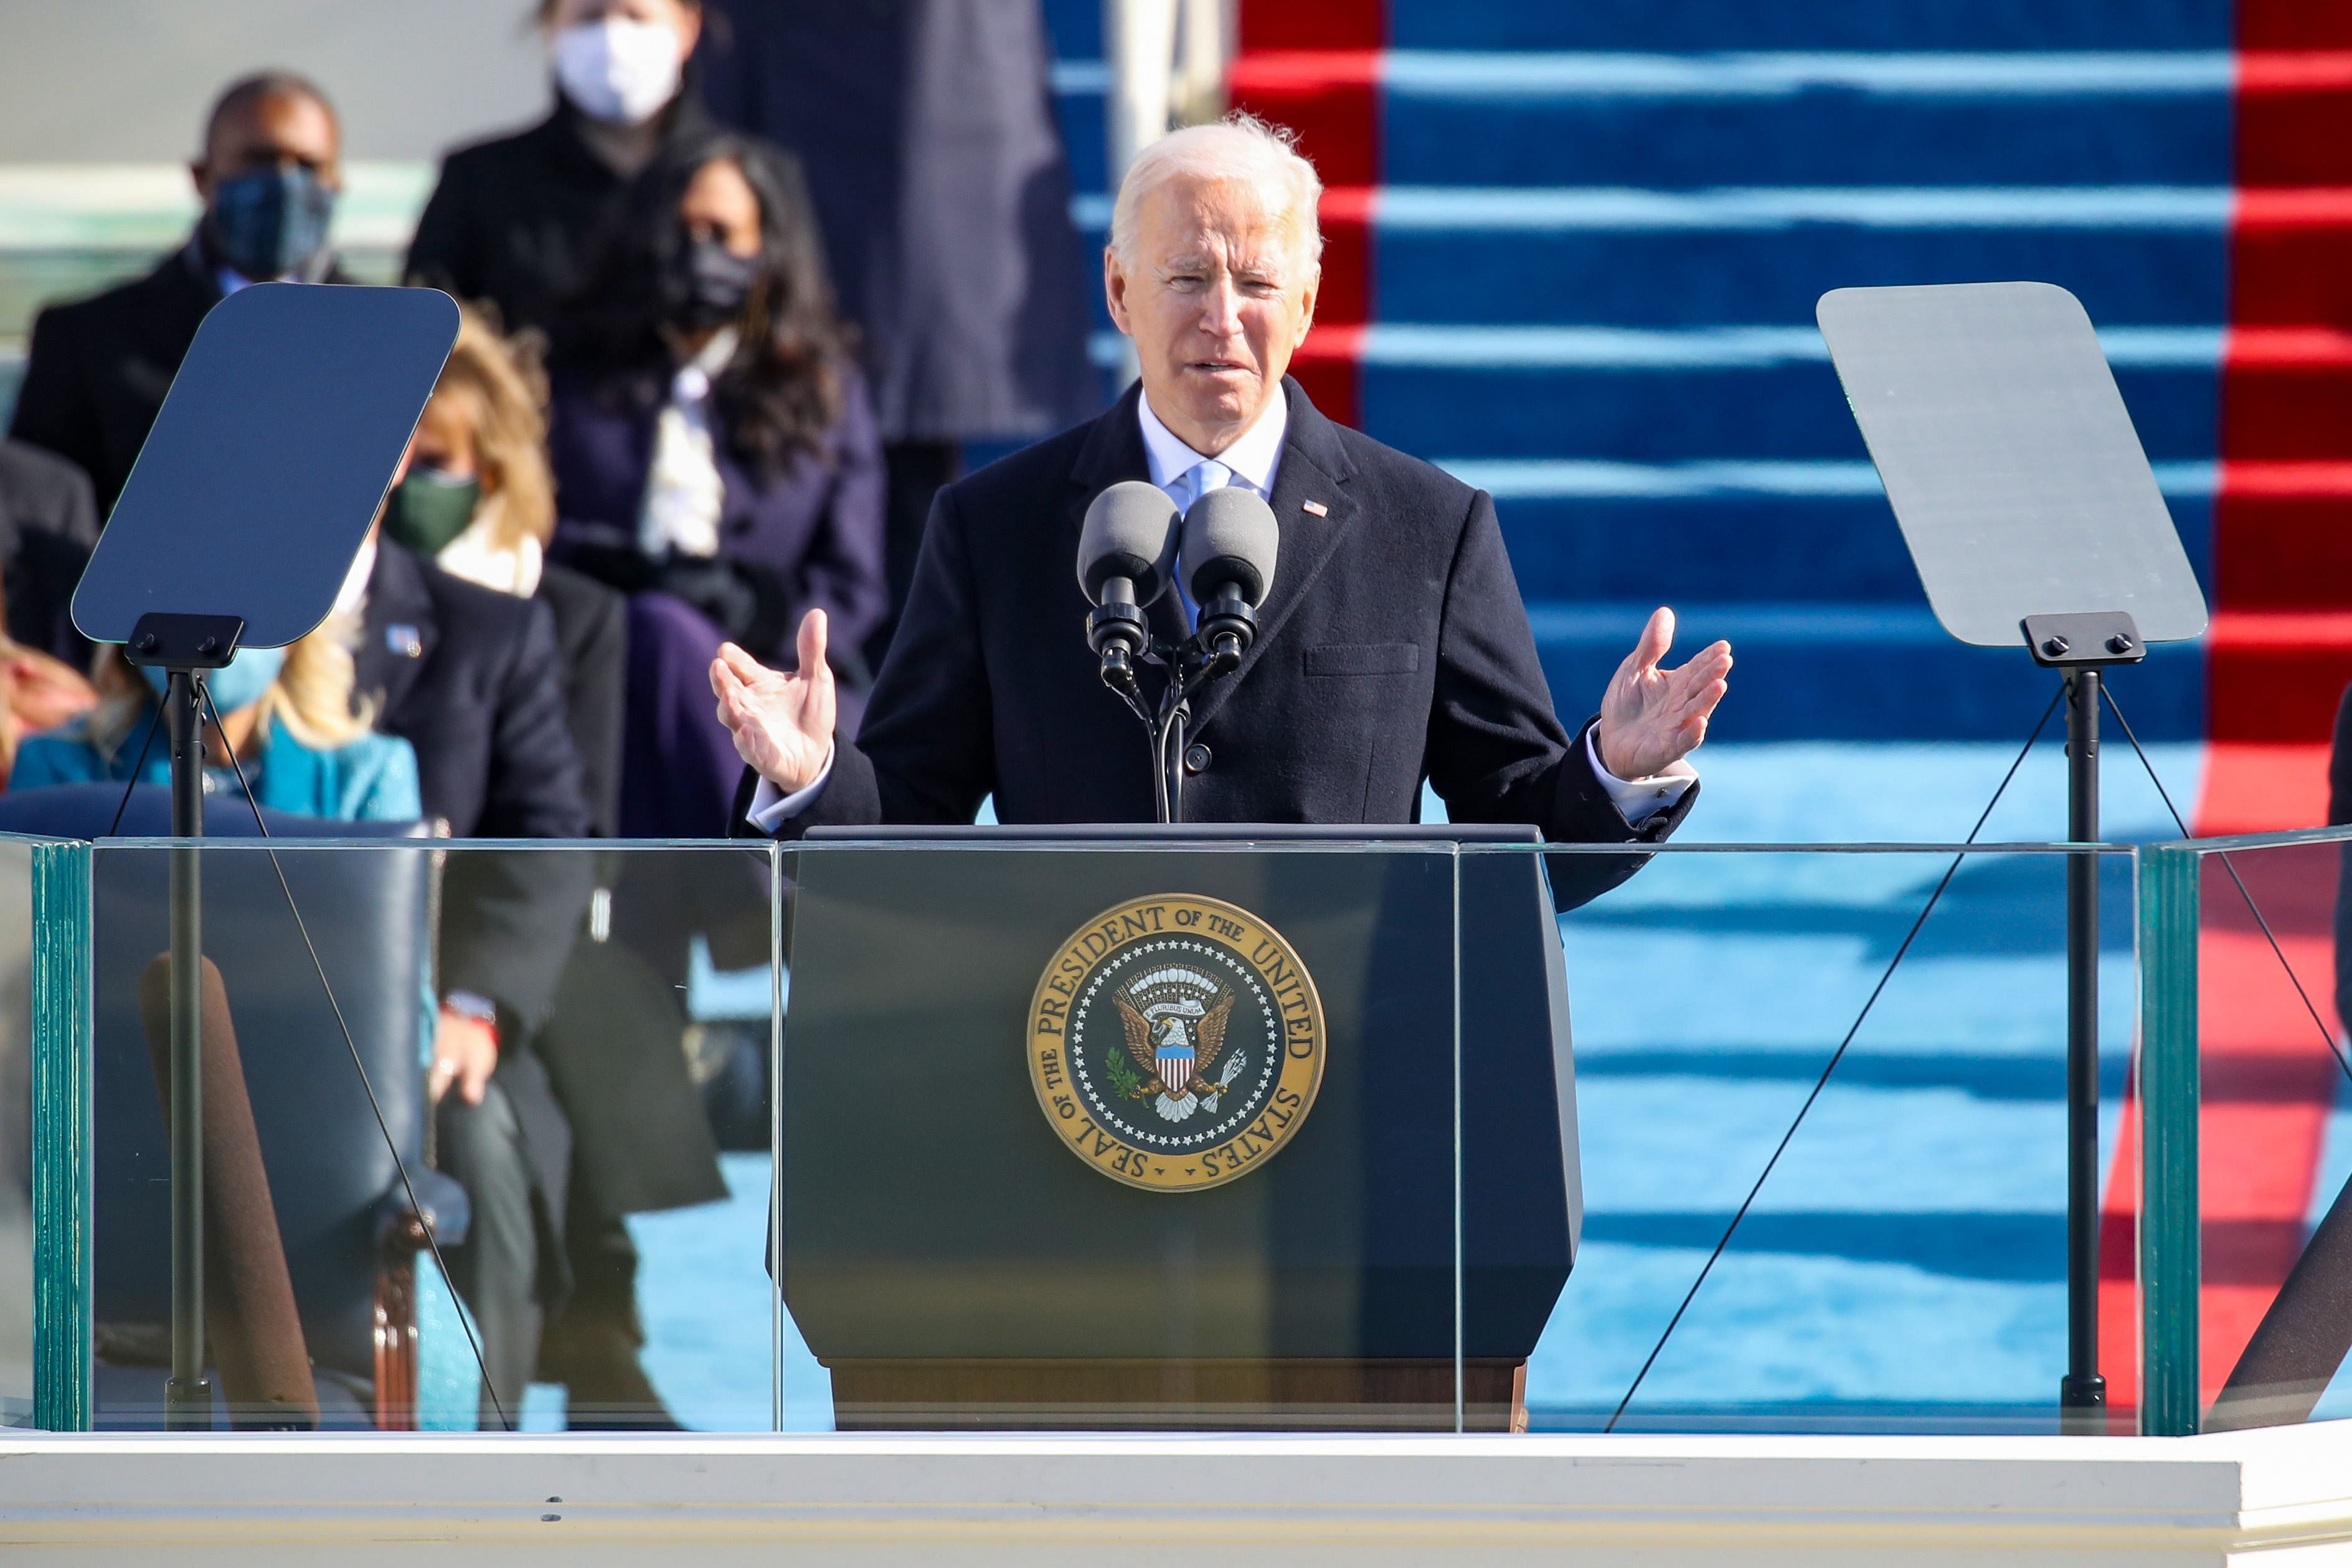 With Democrats in control of both chambers of Congress and the White House, Biden has a unique opportunity to make good on his ambitious agenda that includes reversing innumerable Trump policies, tackling the COVID-19 pandemic and rescuing the economy. Credit: AFP